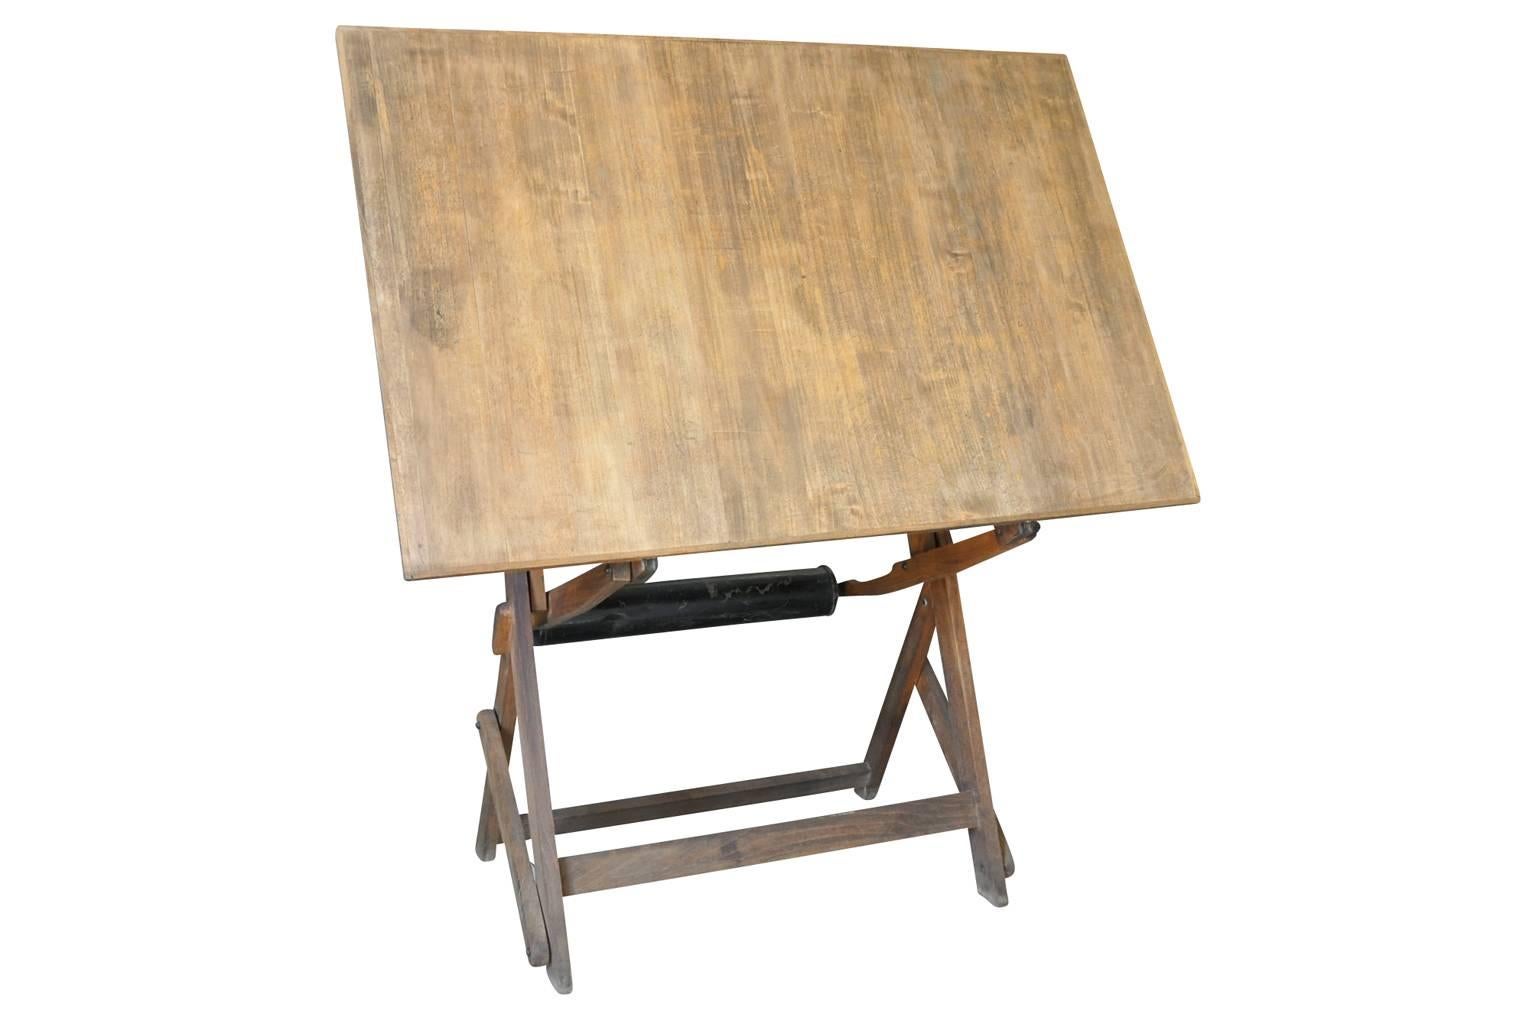 A wonderful early 20th century drafting table, architect's drawing table from France. Soundly constructed in beechwood. Not only great to draw from but a terrific decorative piece that serves beautifully as an easel for the display of a painting -